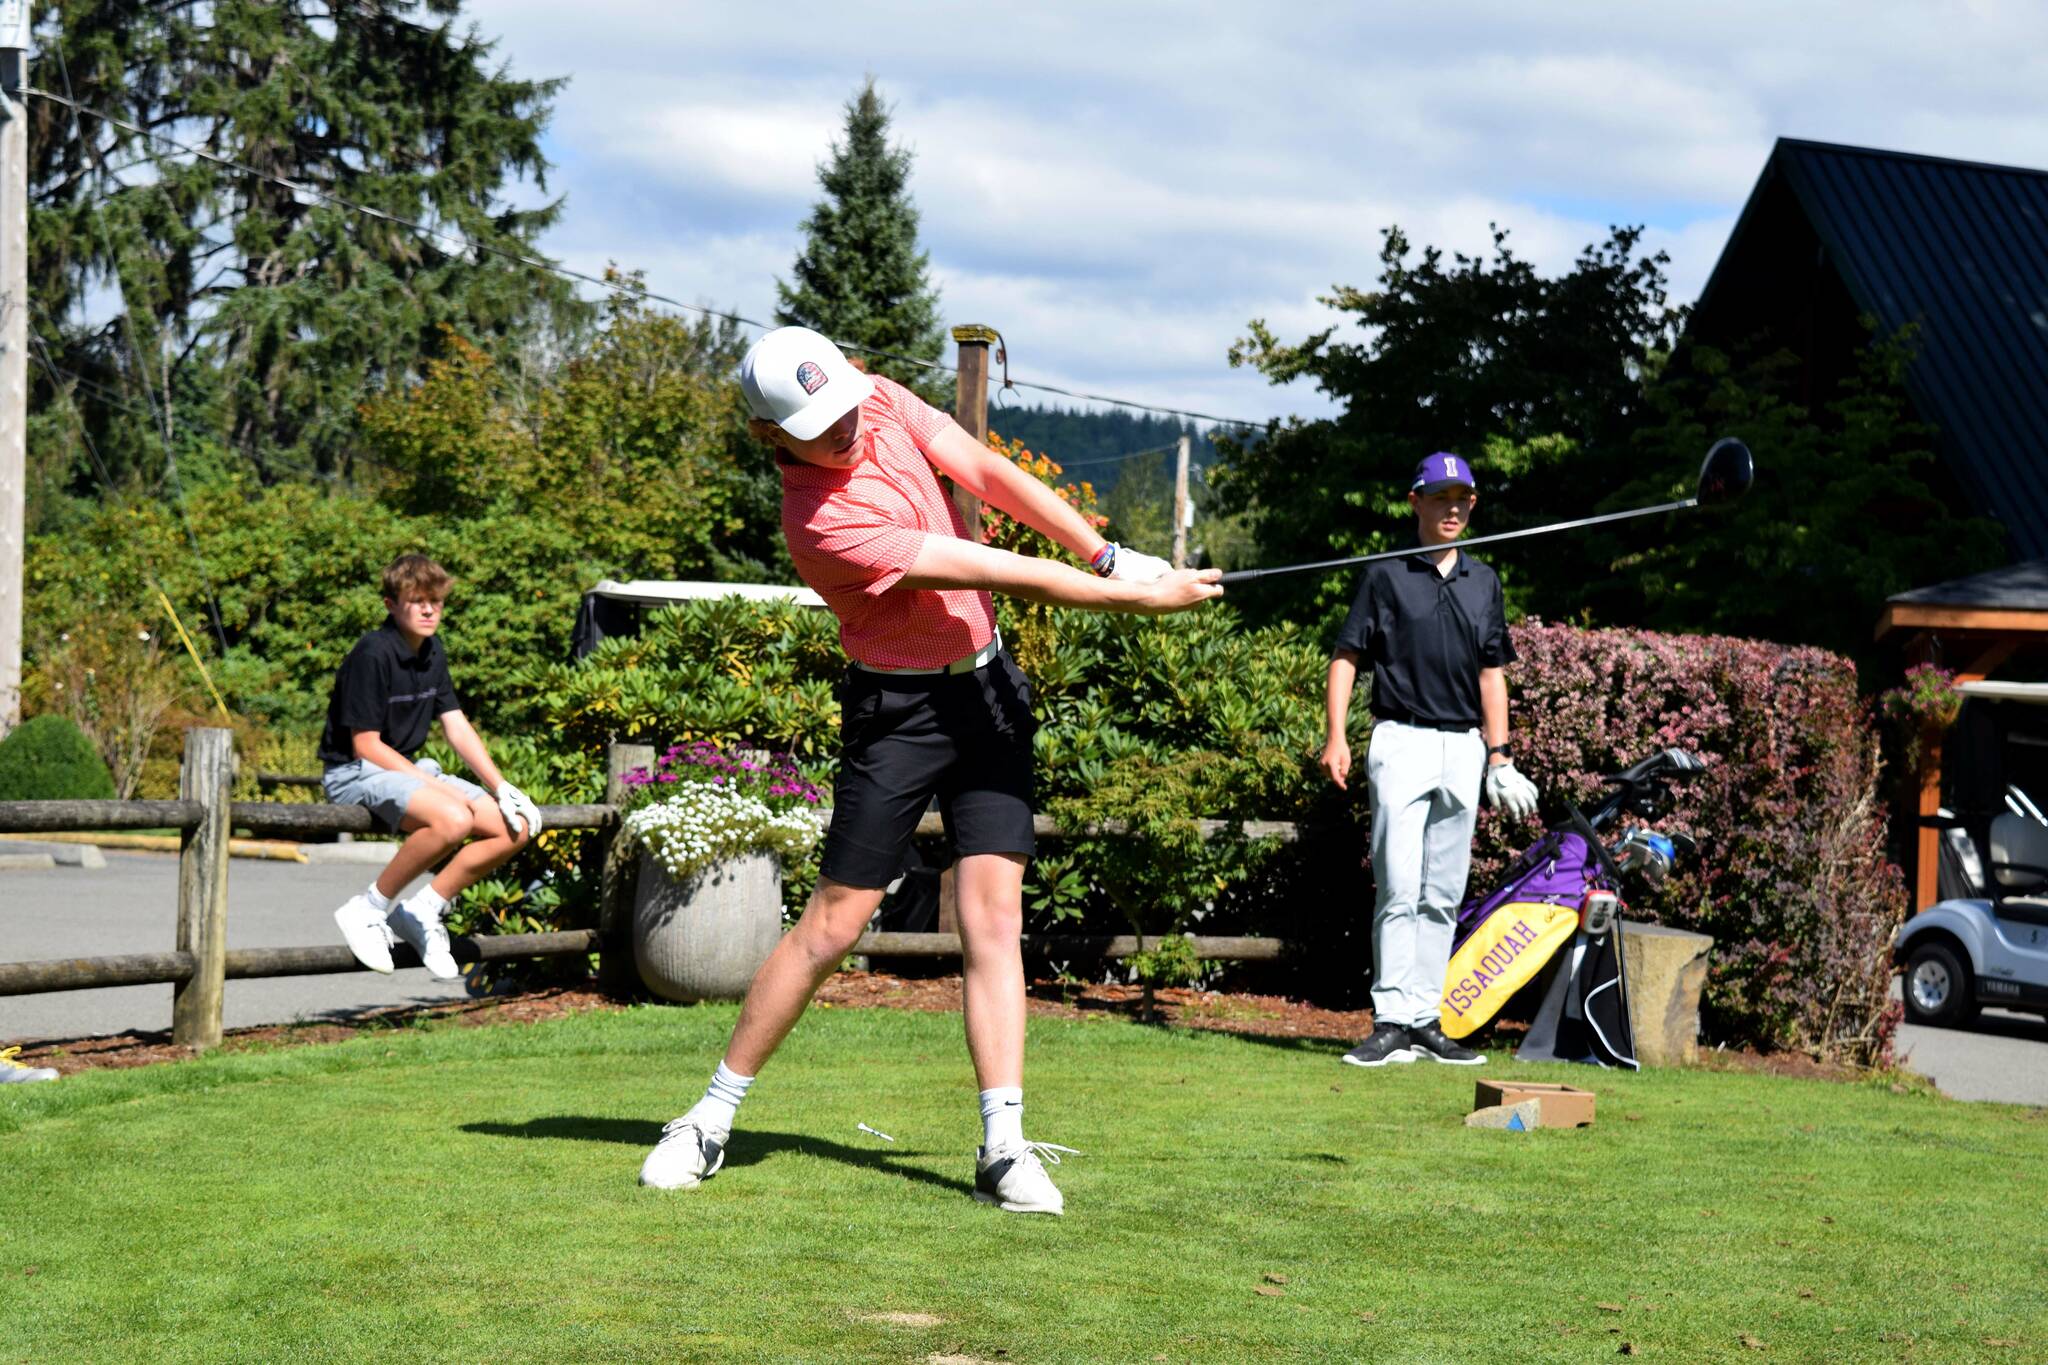 Photo by Conor Wilson/Valley Record.
The Mount Si golf tem has its sights set on the KingCo league title.